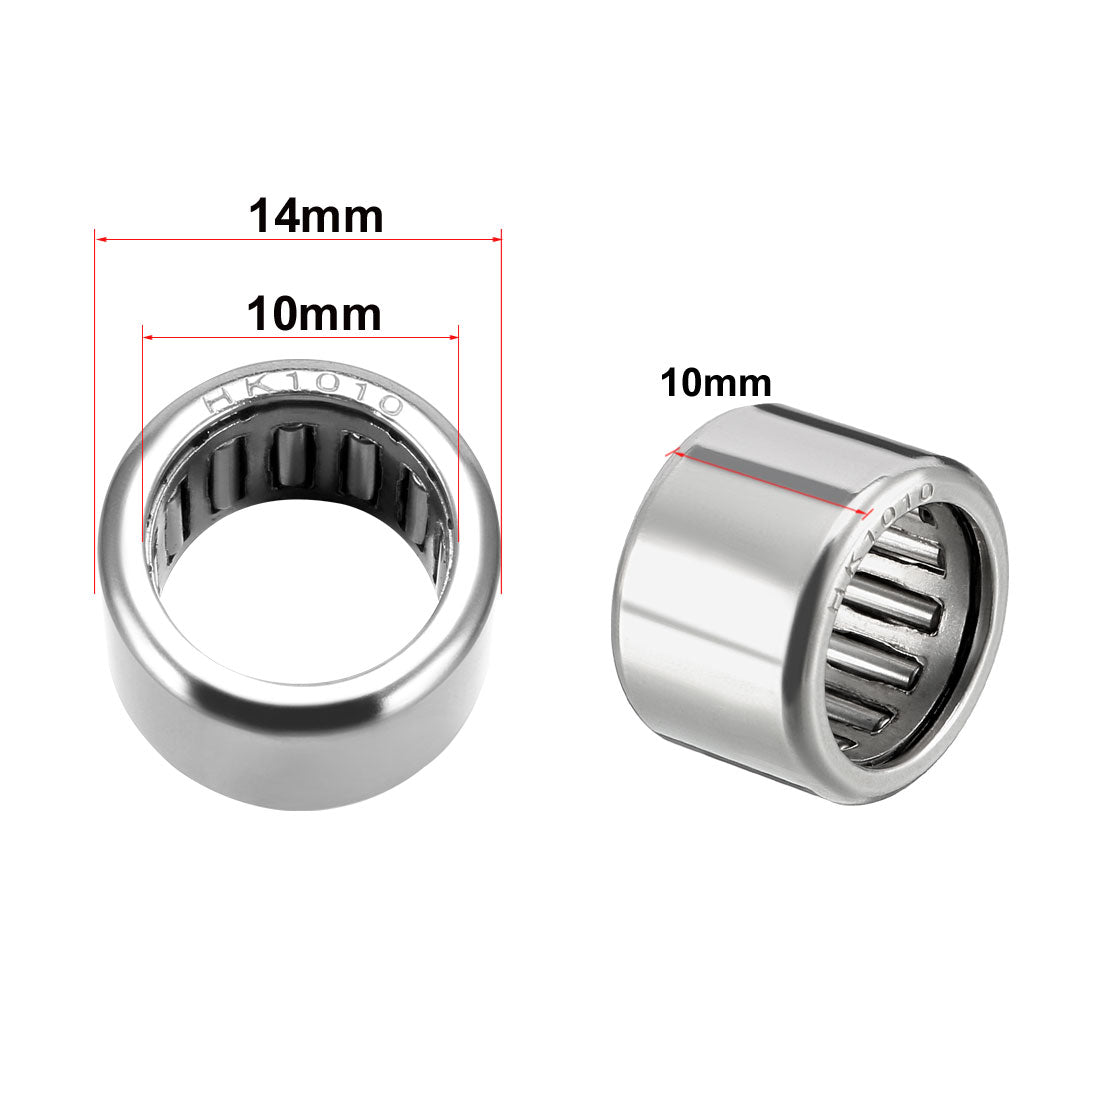 uxcell Uxcell HK1010 Drawn Cup Needle Roller Bearings, Open End, 10mm Bore Dia, 14mm OD, 10mm Width 10pcs